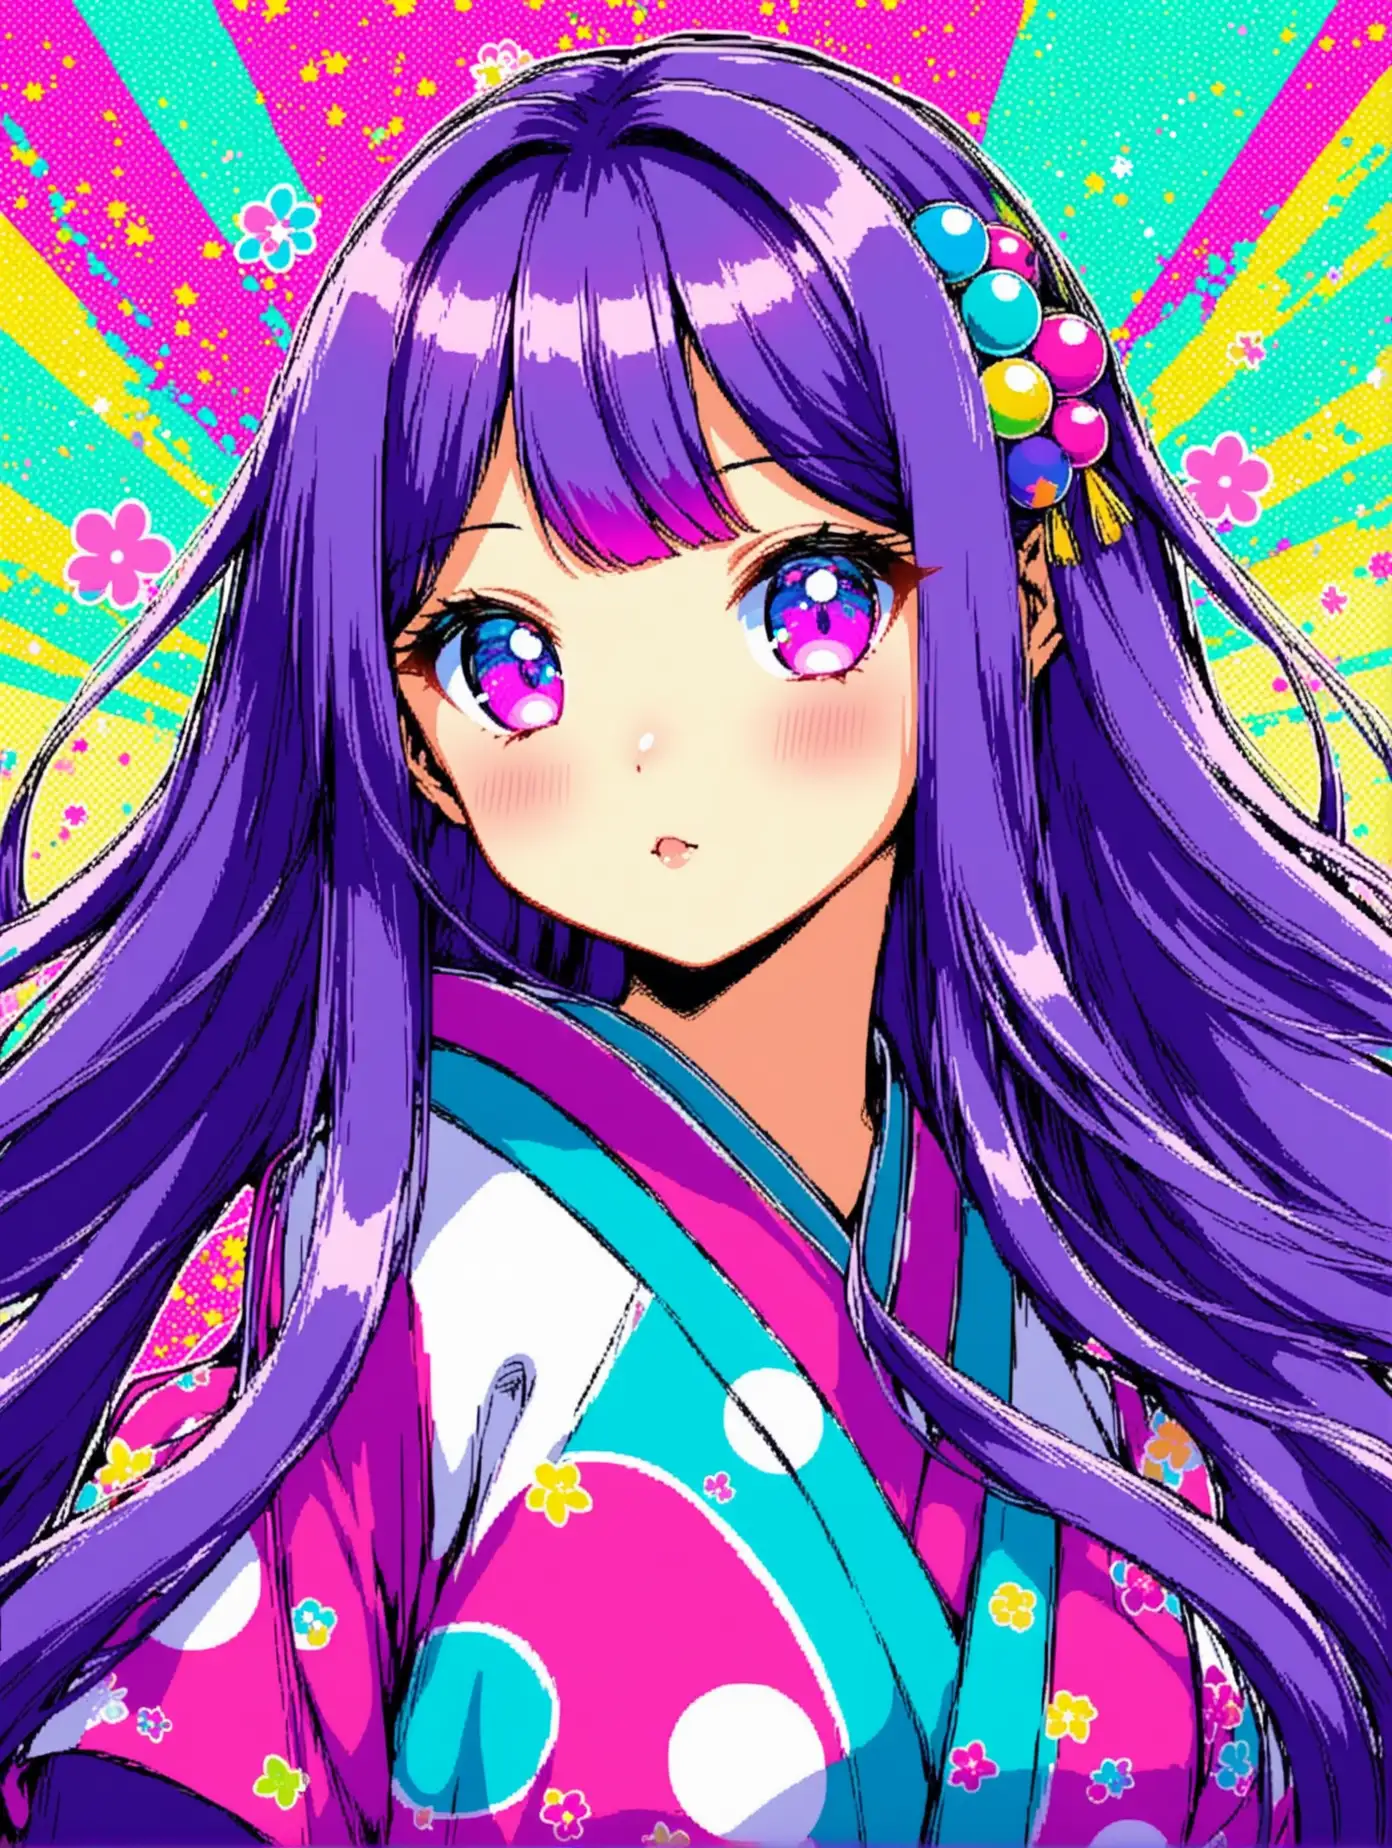 Vibrant Anime Girl with Purple and Blue Colors in Japanese Pop Art Kawaii Style